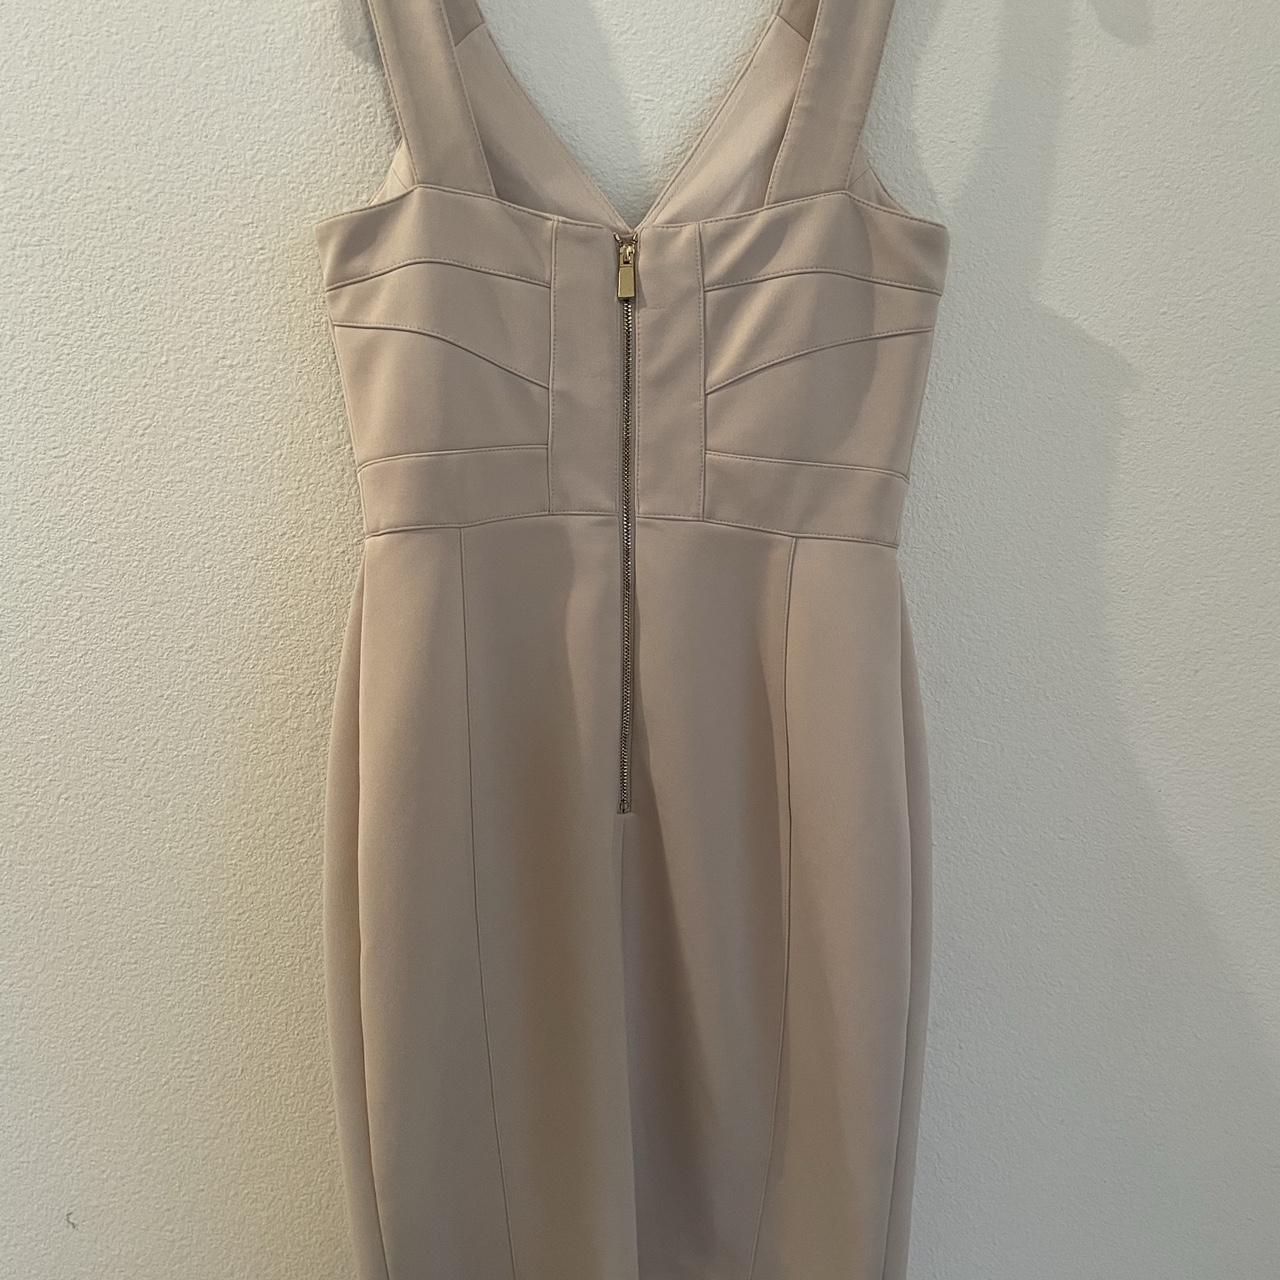 Vince Camuto Women's Tan and Cream Dress (4)